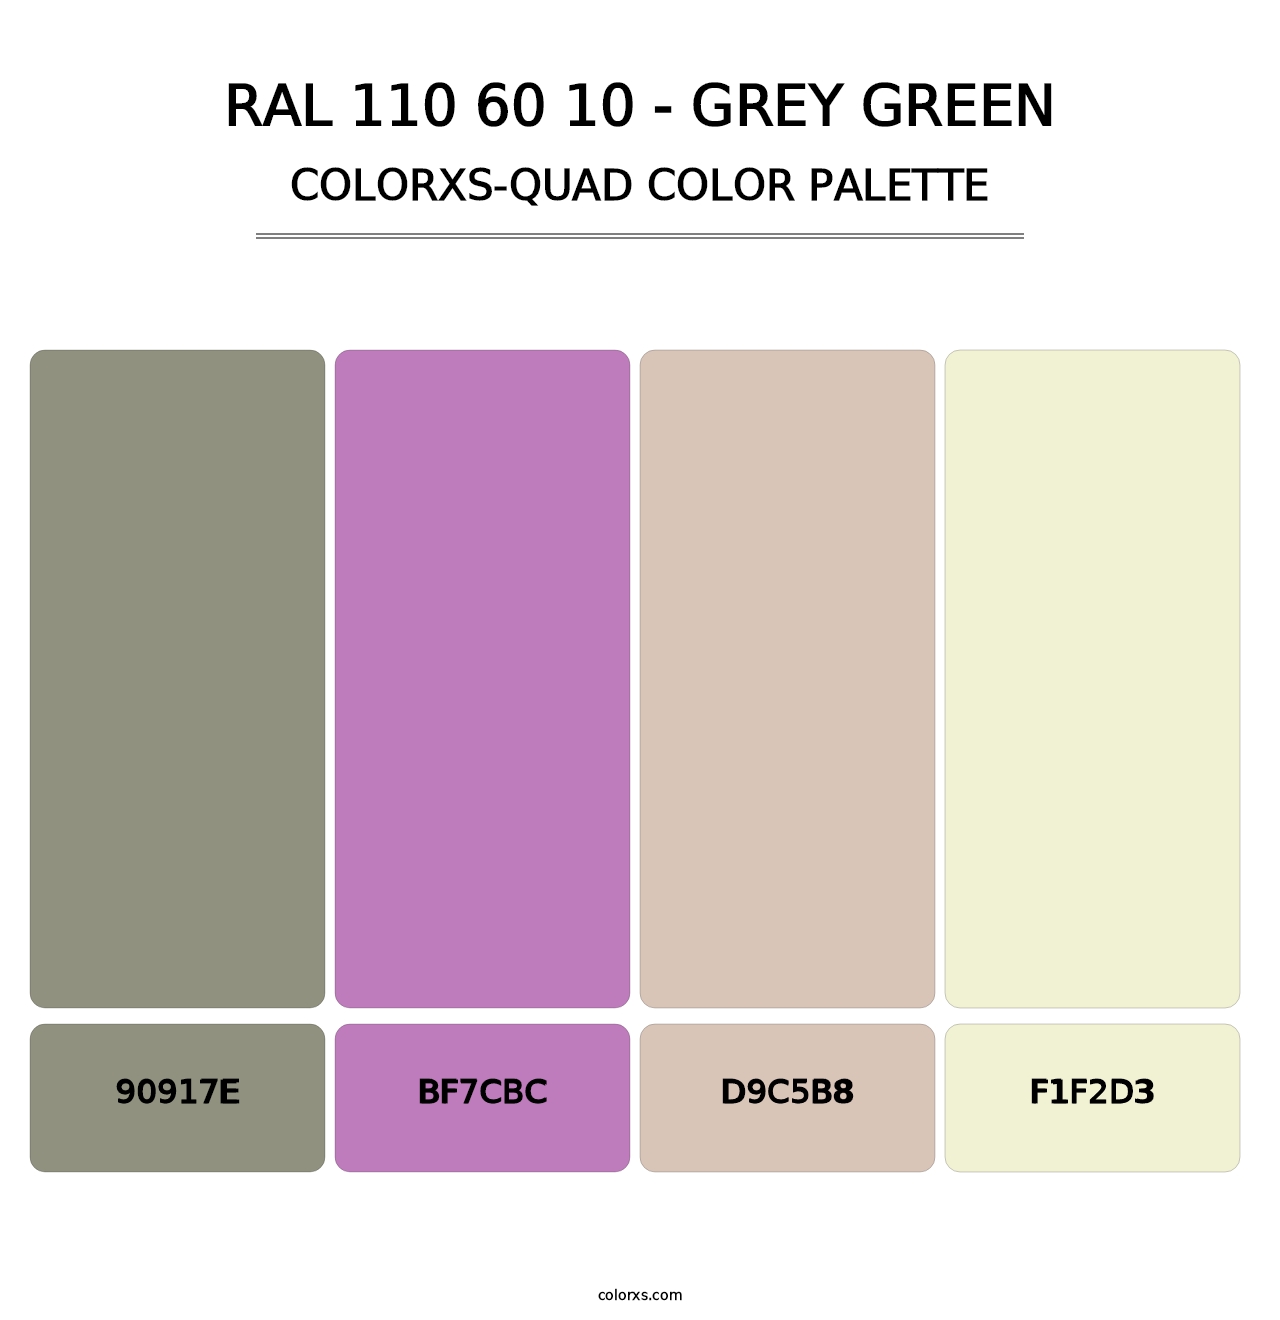 RAL 110 60 10 - Grey Green - Colorxs Quad Palette